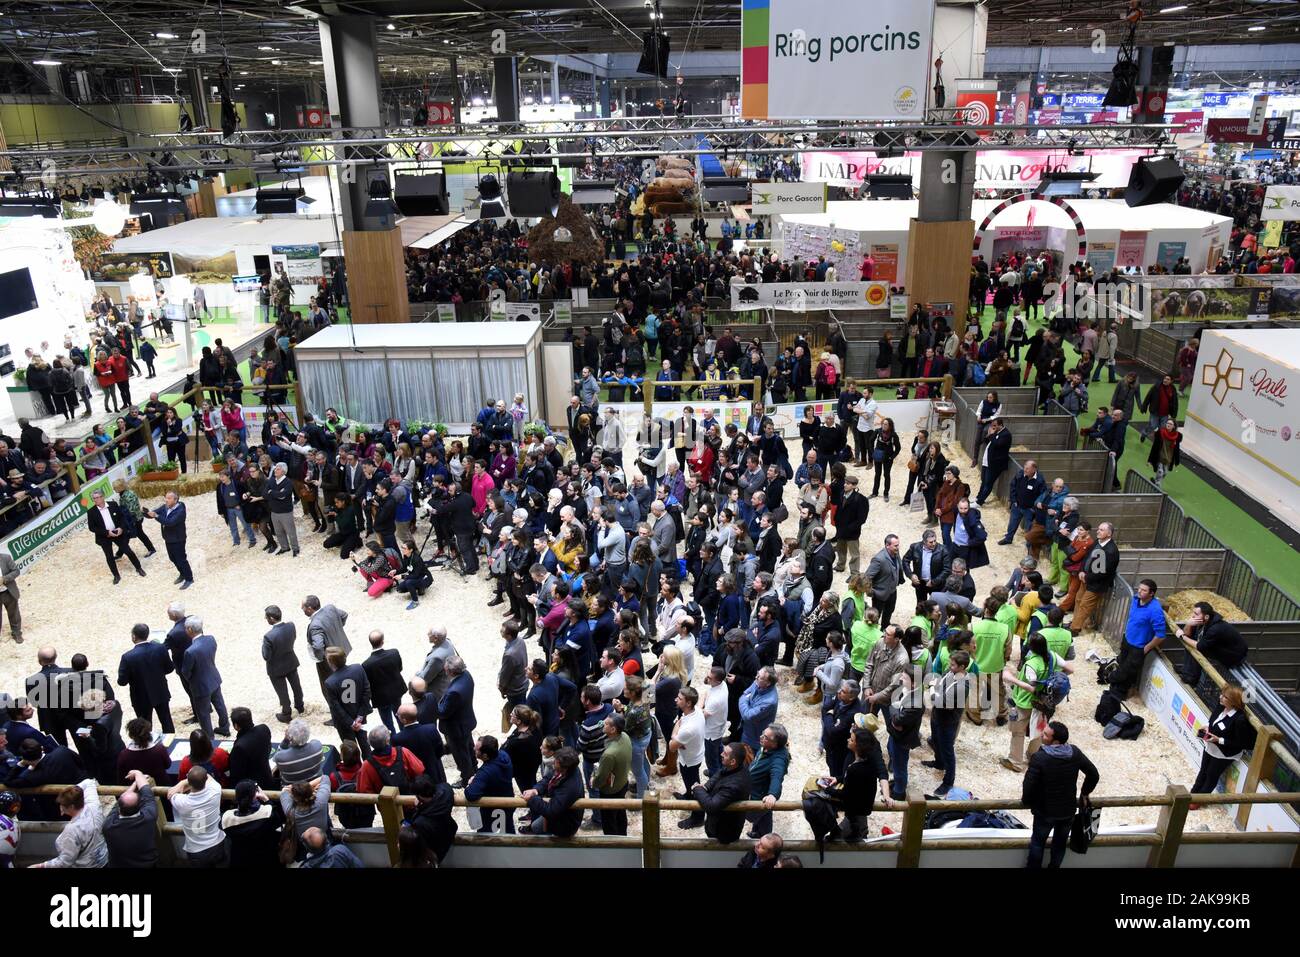 Paris, “Porte de Versailles” city gate, on March 1, 2019: International Agricultural Show. Atmosphere in the aisles of the show, overview Stock Photo